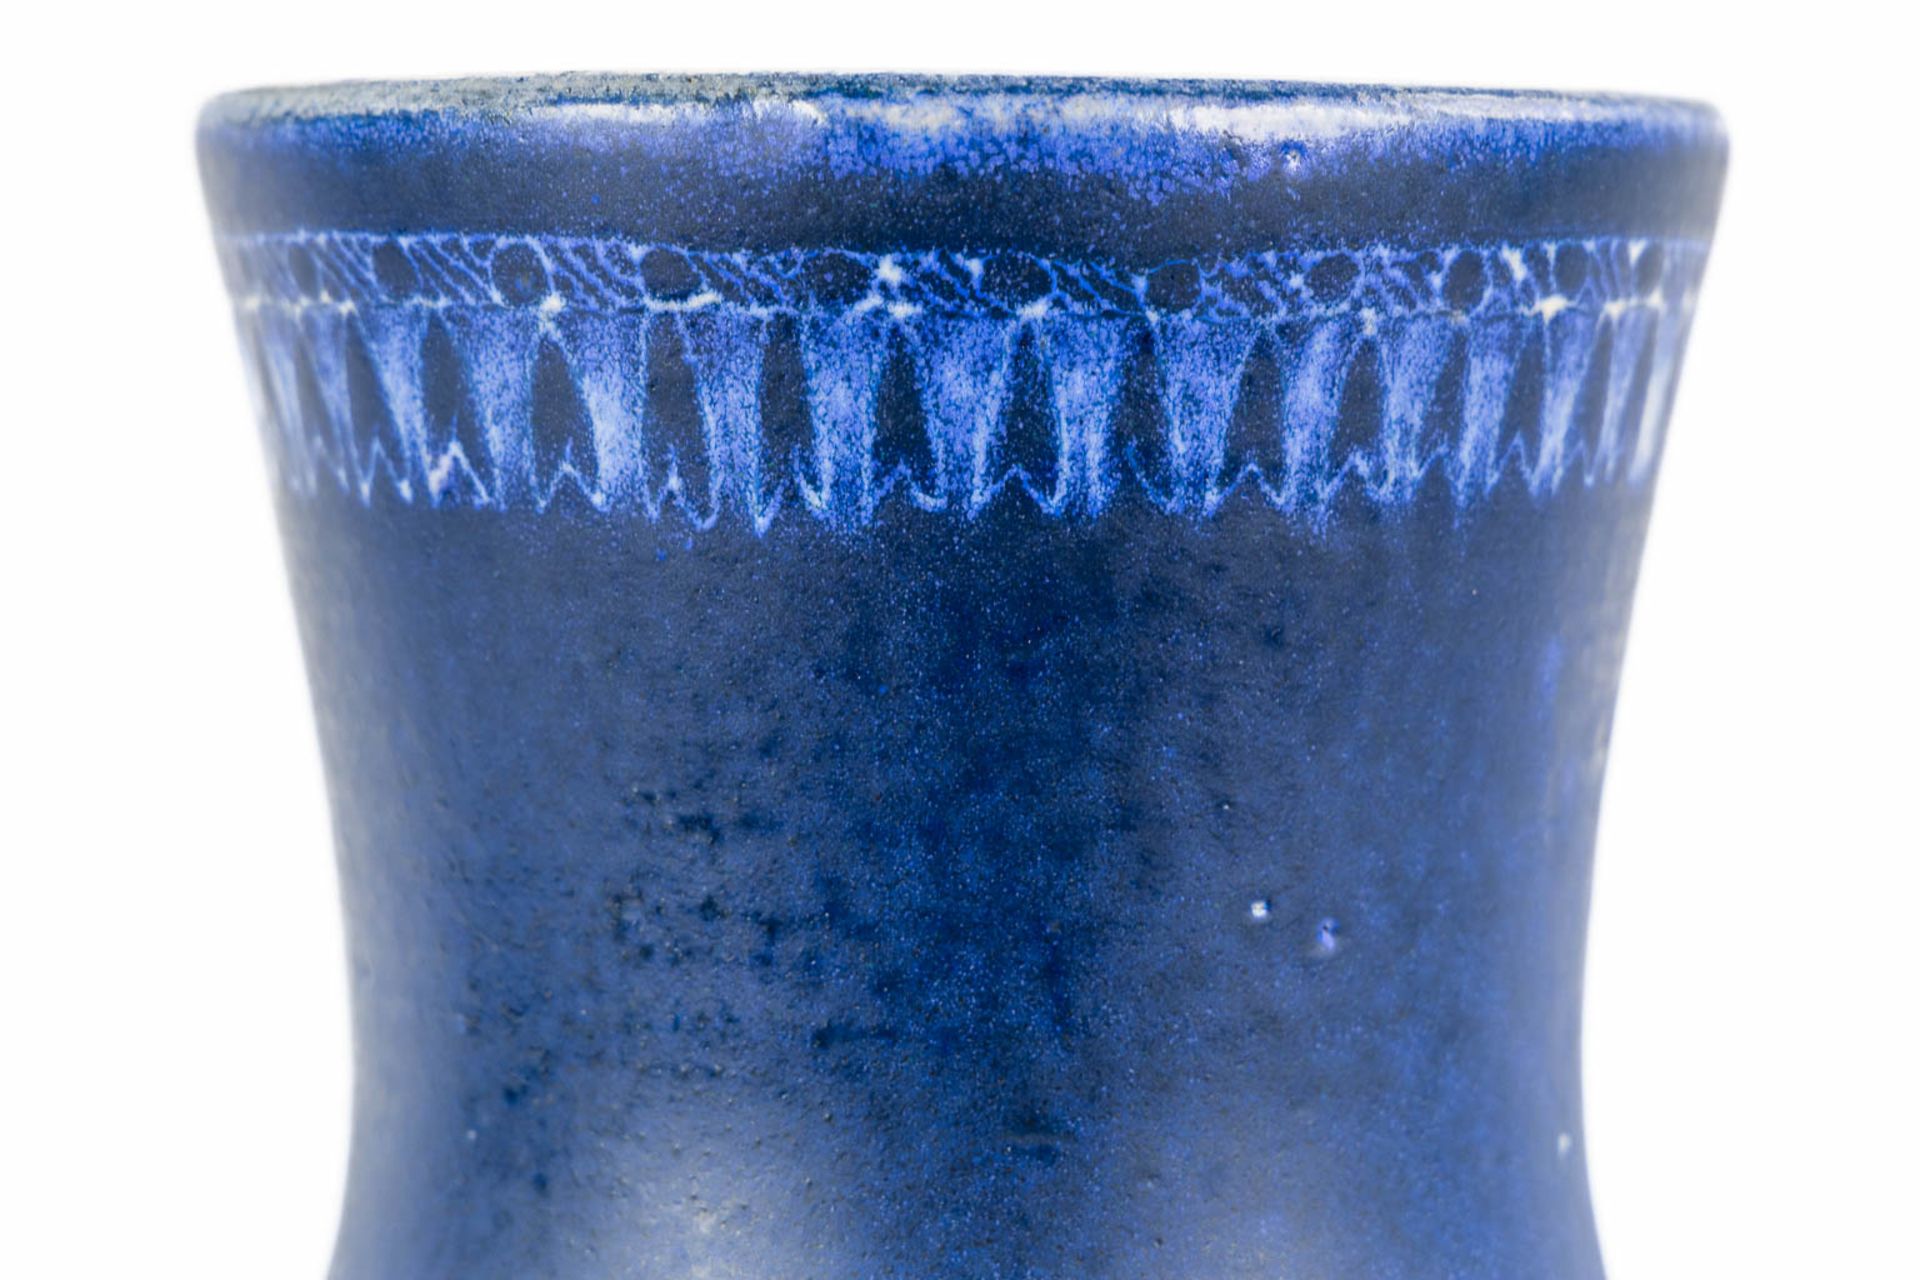 A vase with blue glaze, glazed ceramics for Perignem. From the early periods. (H:31,5 x D:18 cm) - Image 10 of 11